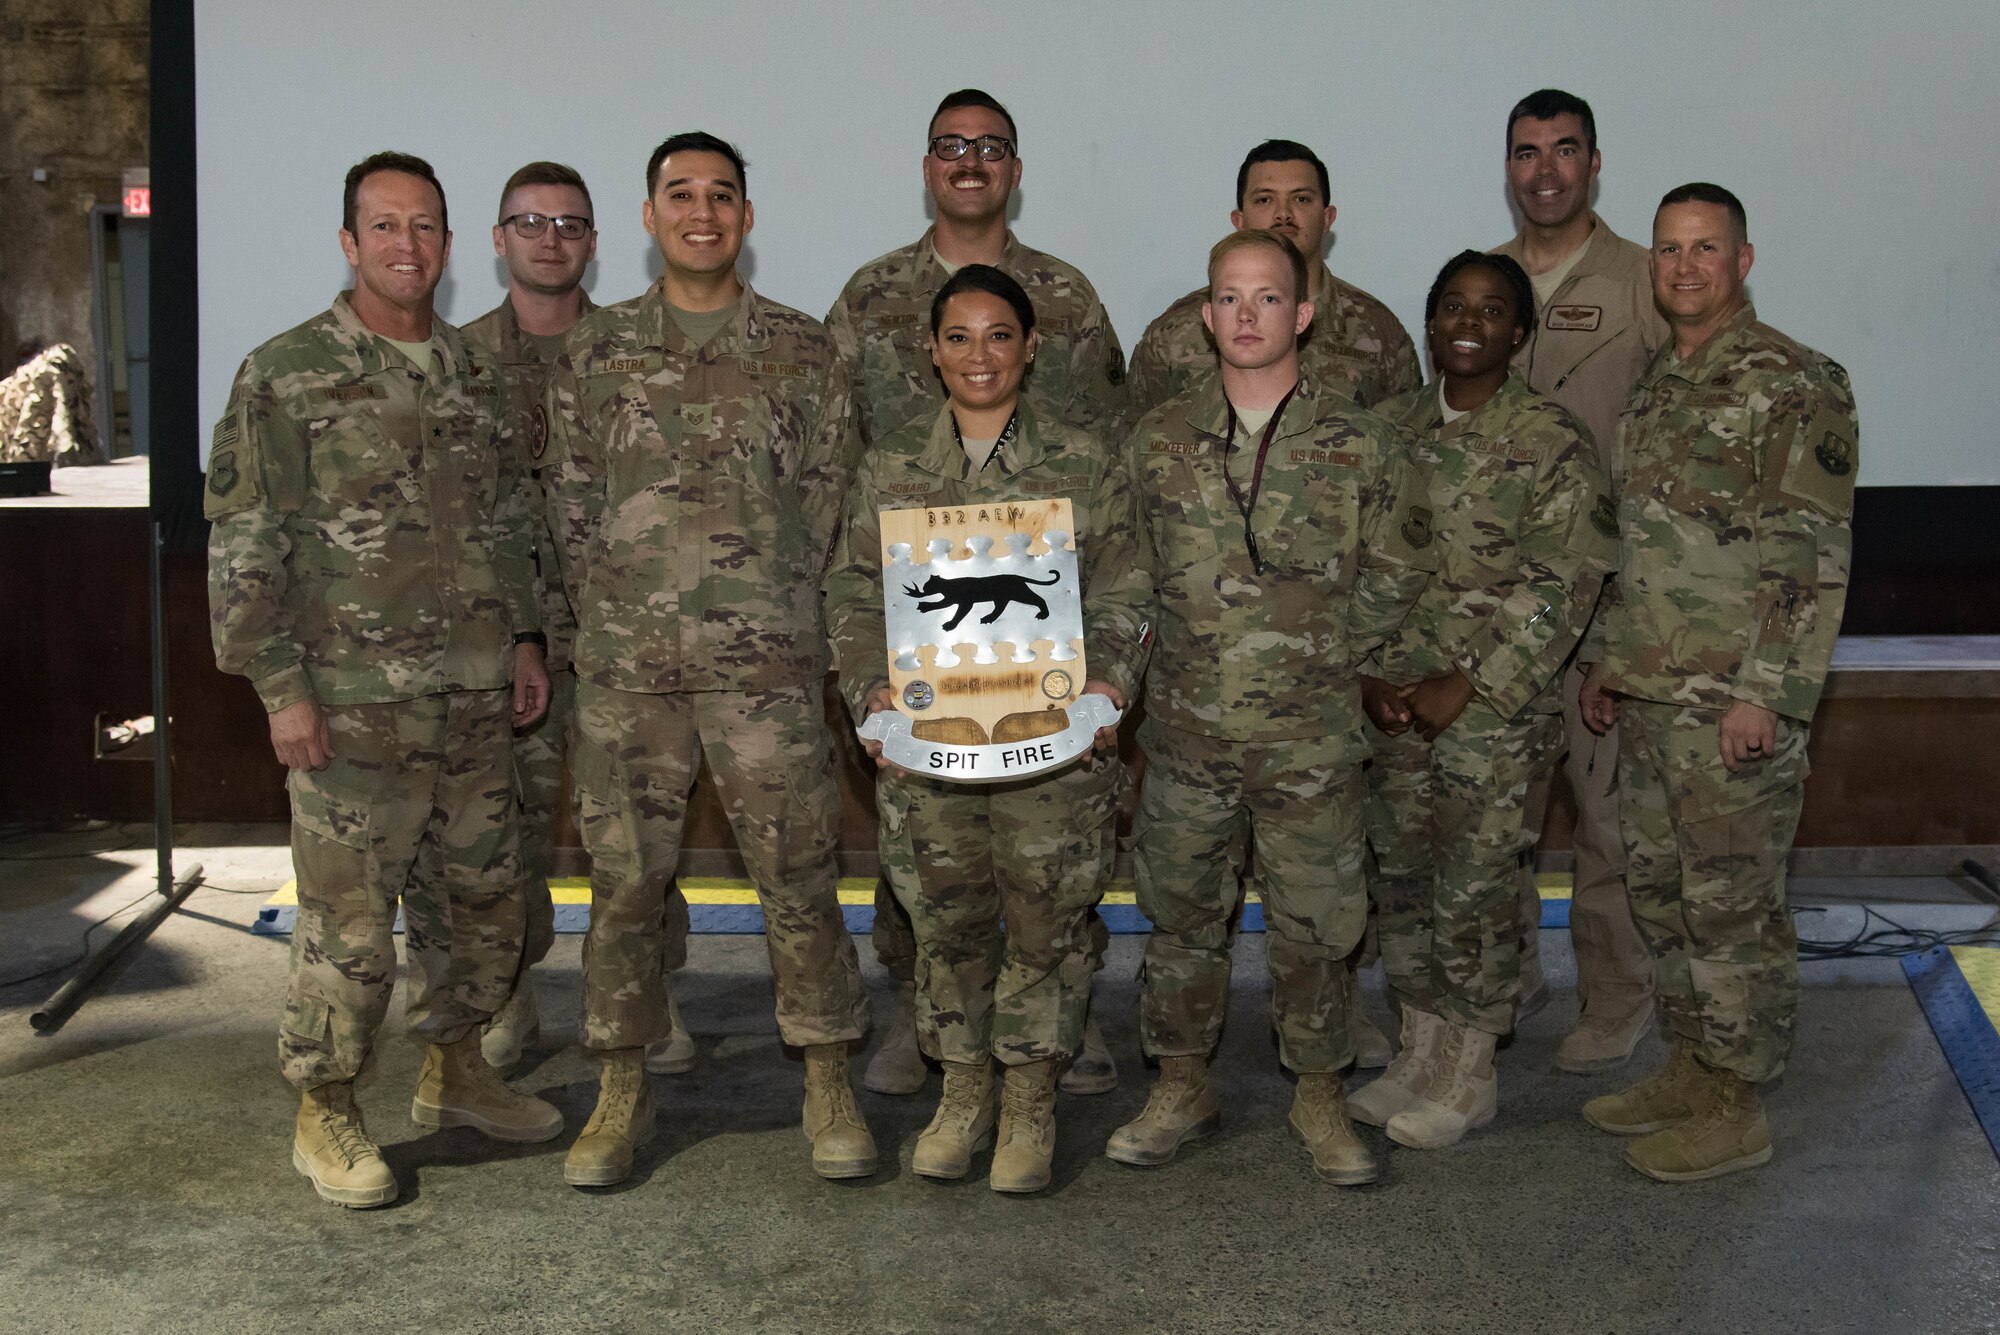 Brig, Gen, David Iverson, 332nd Air Expeditionary Wing commander, and Chief Master Sgt. Jason Tiek, 332nd Air Expeditionary Wing command chief, stand with the five finalists for the first Red Tails Commander’s Innovation Challenge, Sept. 28, 2018, at an undisclosed location in Southwest Asia.